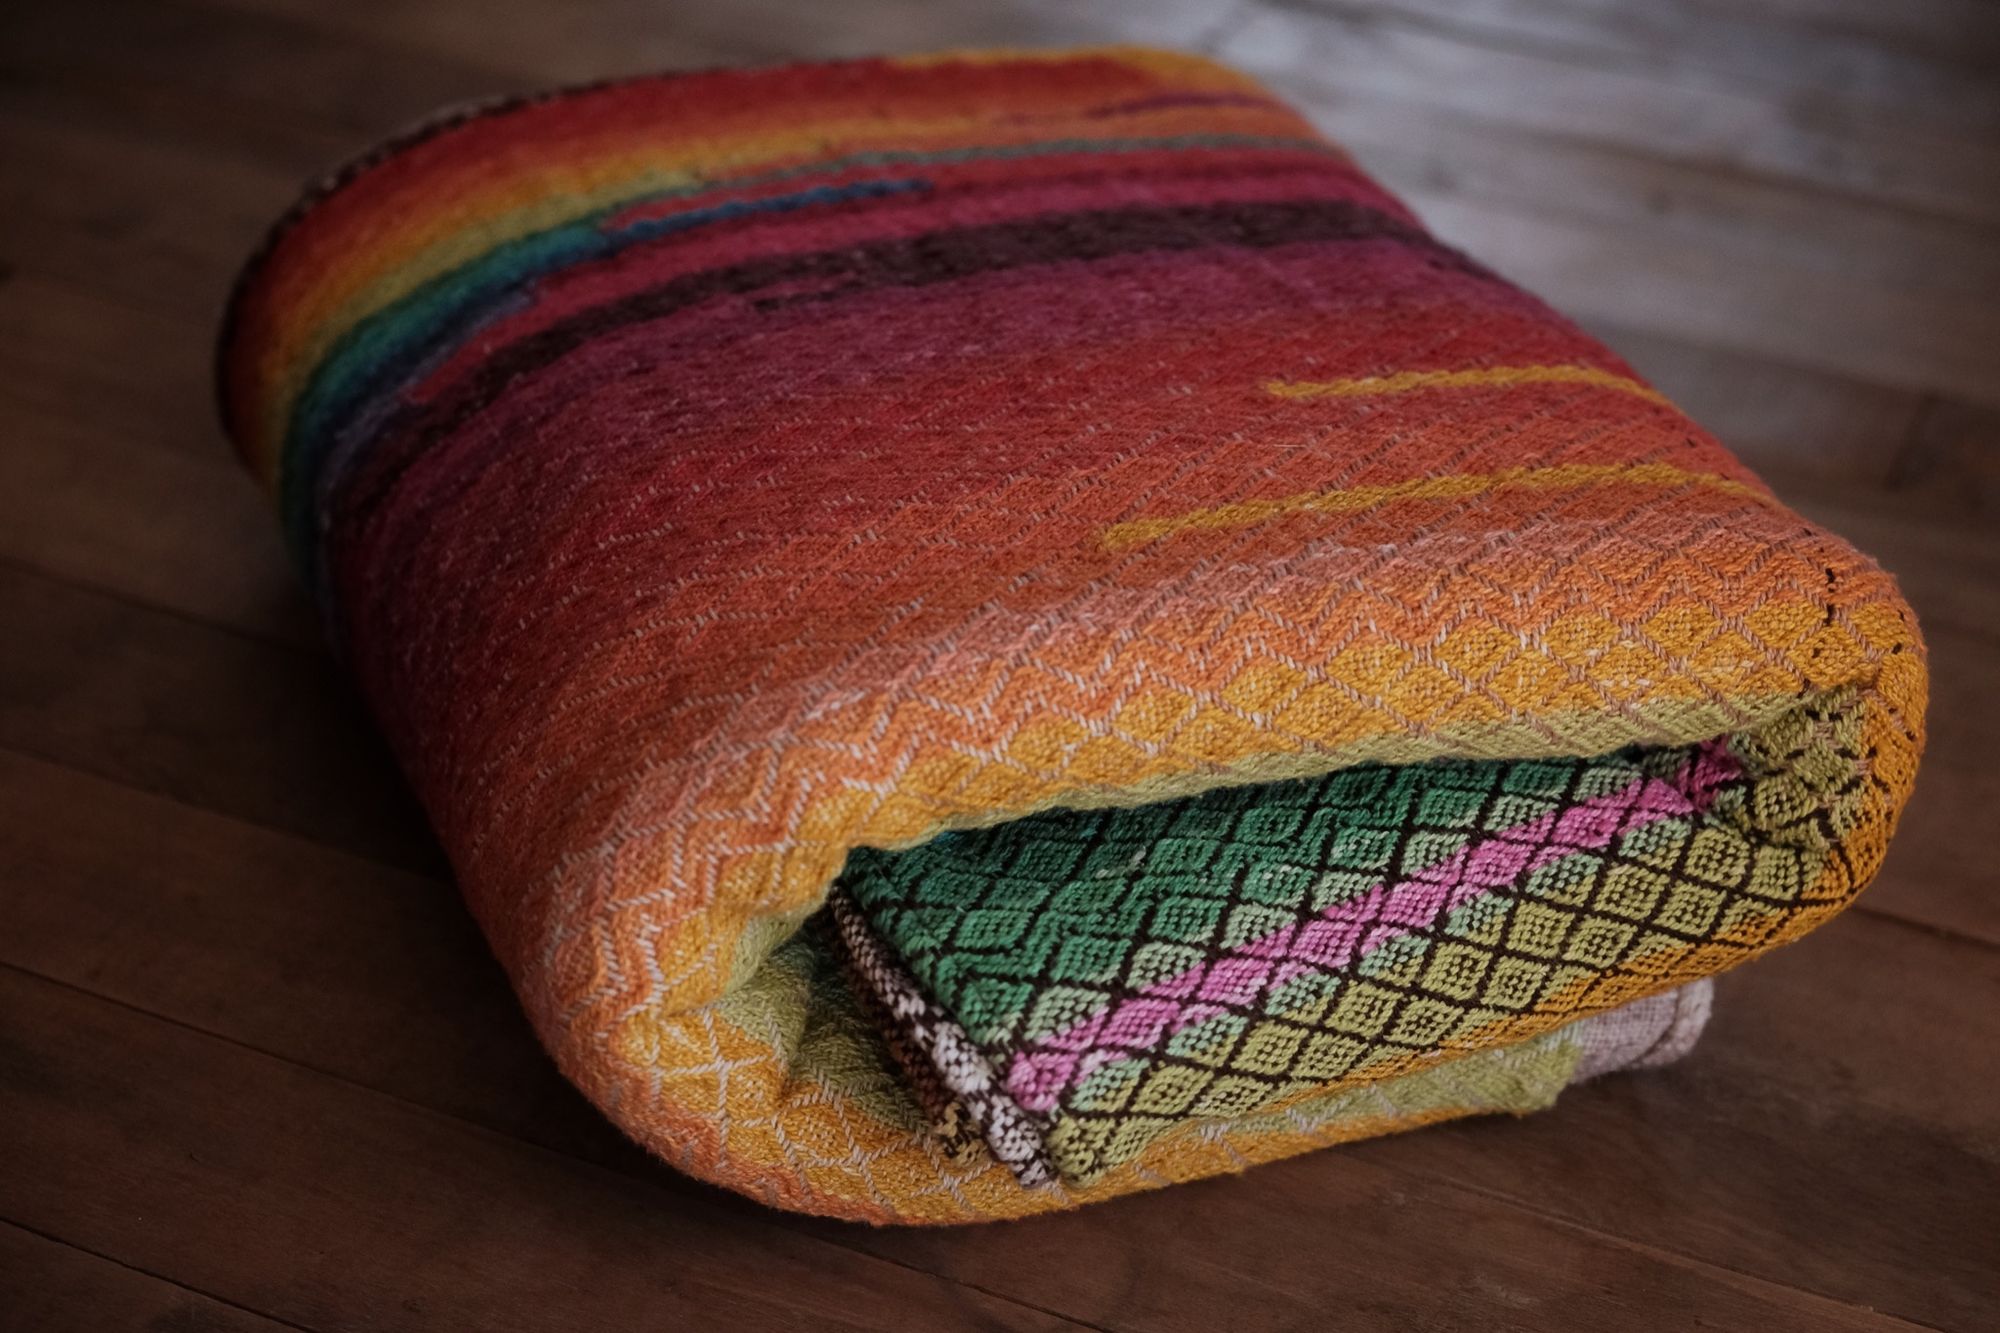 handwoven raw silk fabric woven with a diamond pattern in rainbow, gray, brown and cream colors folded on a wooden floor